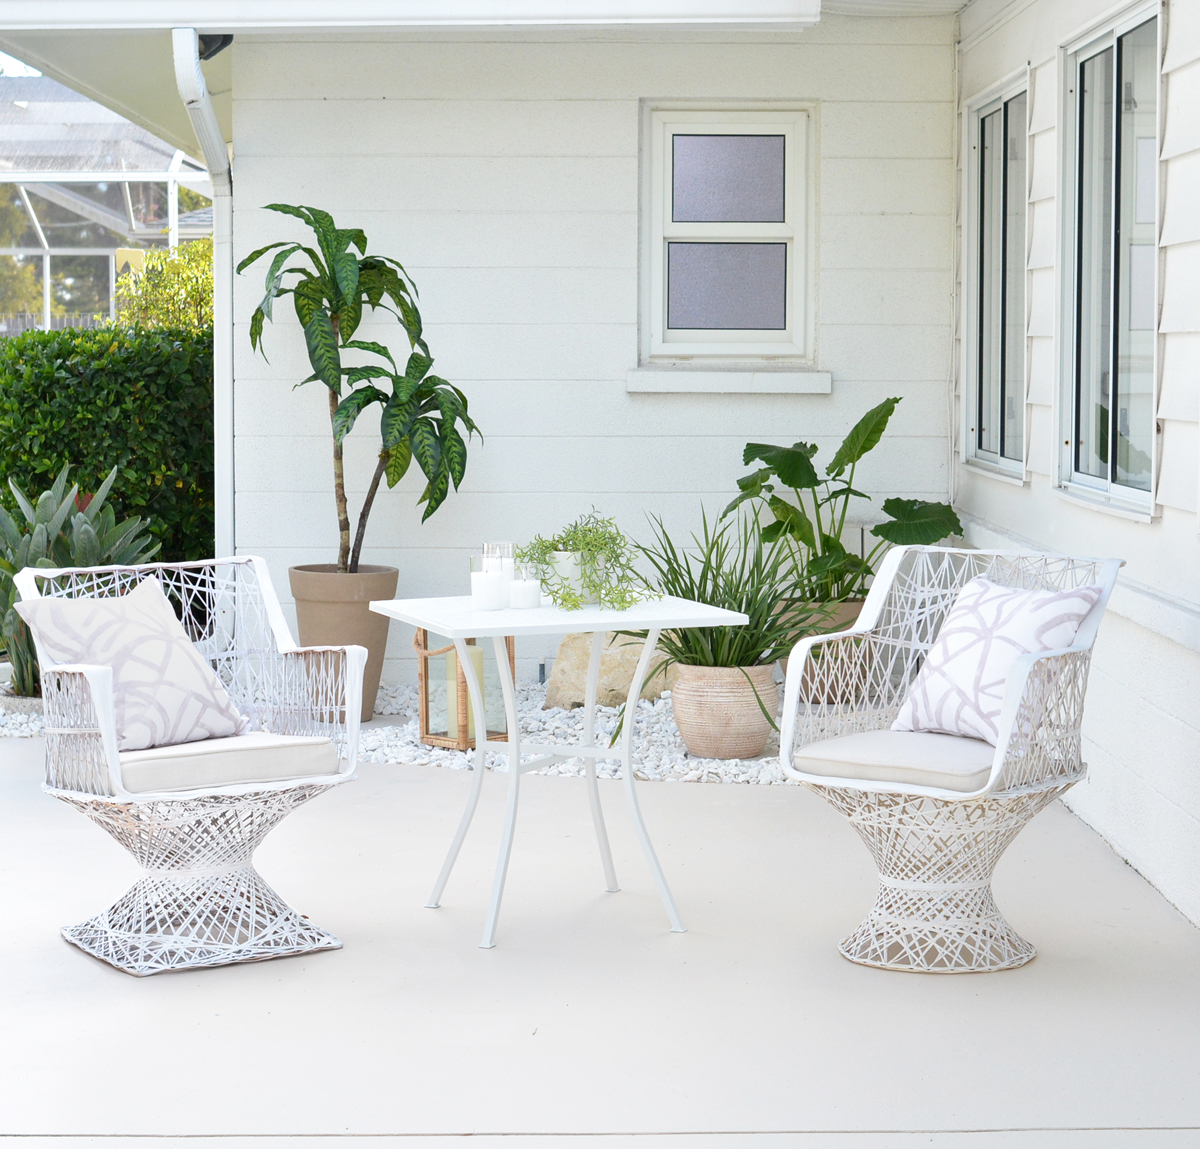 Florida Home: Patio Makeover | Centsational Type